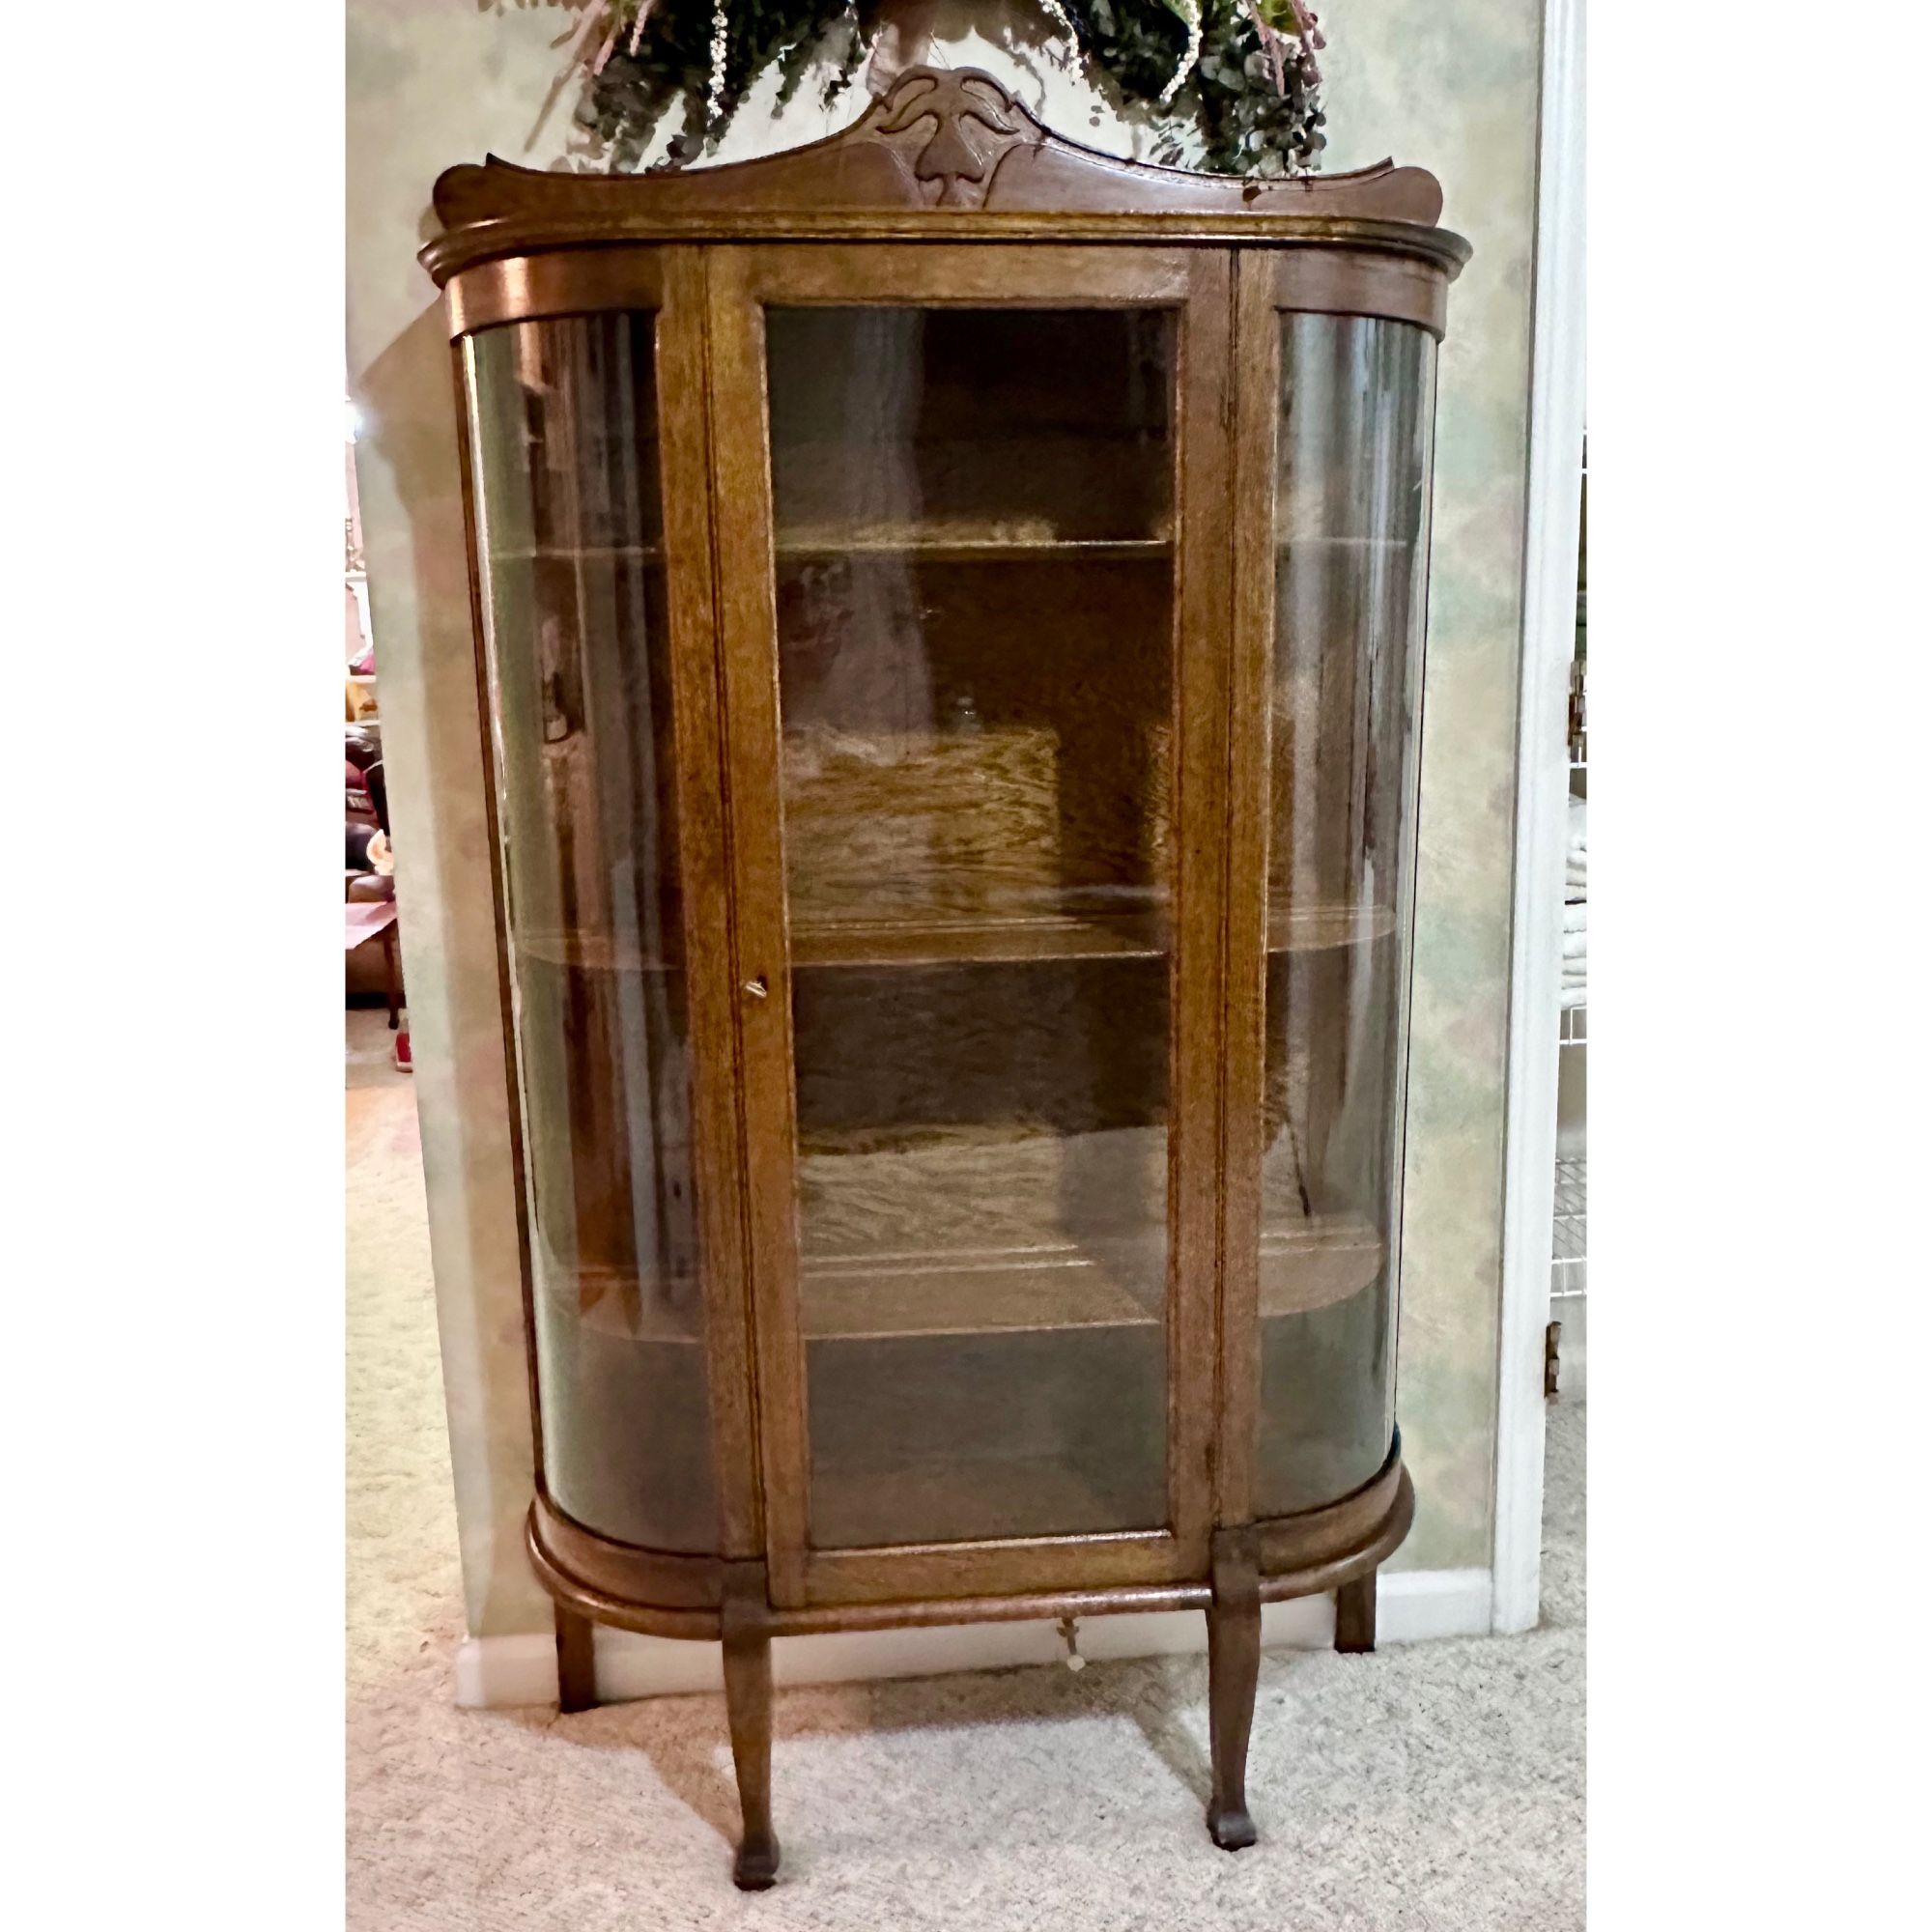 Antique China Cabinet - Oak Curved Glass China / Display Cabinet